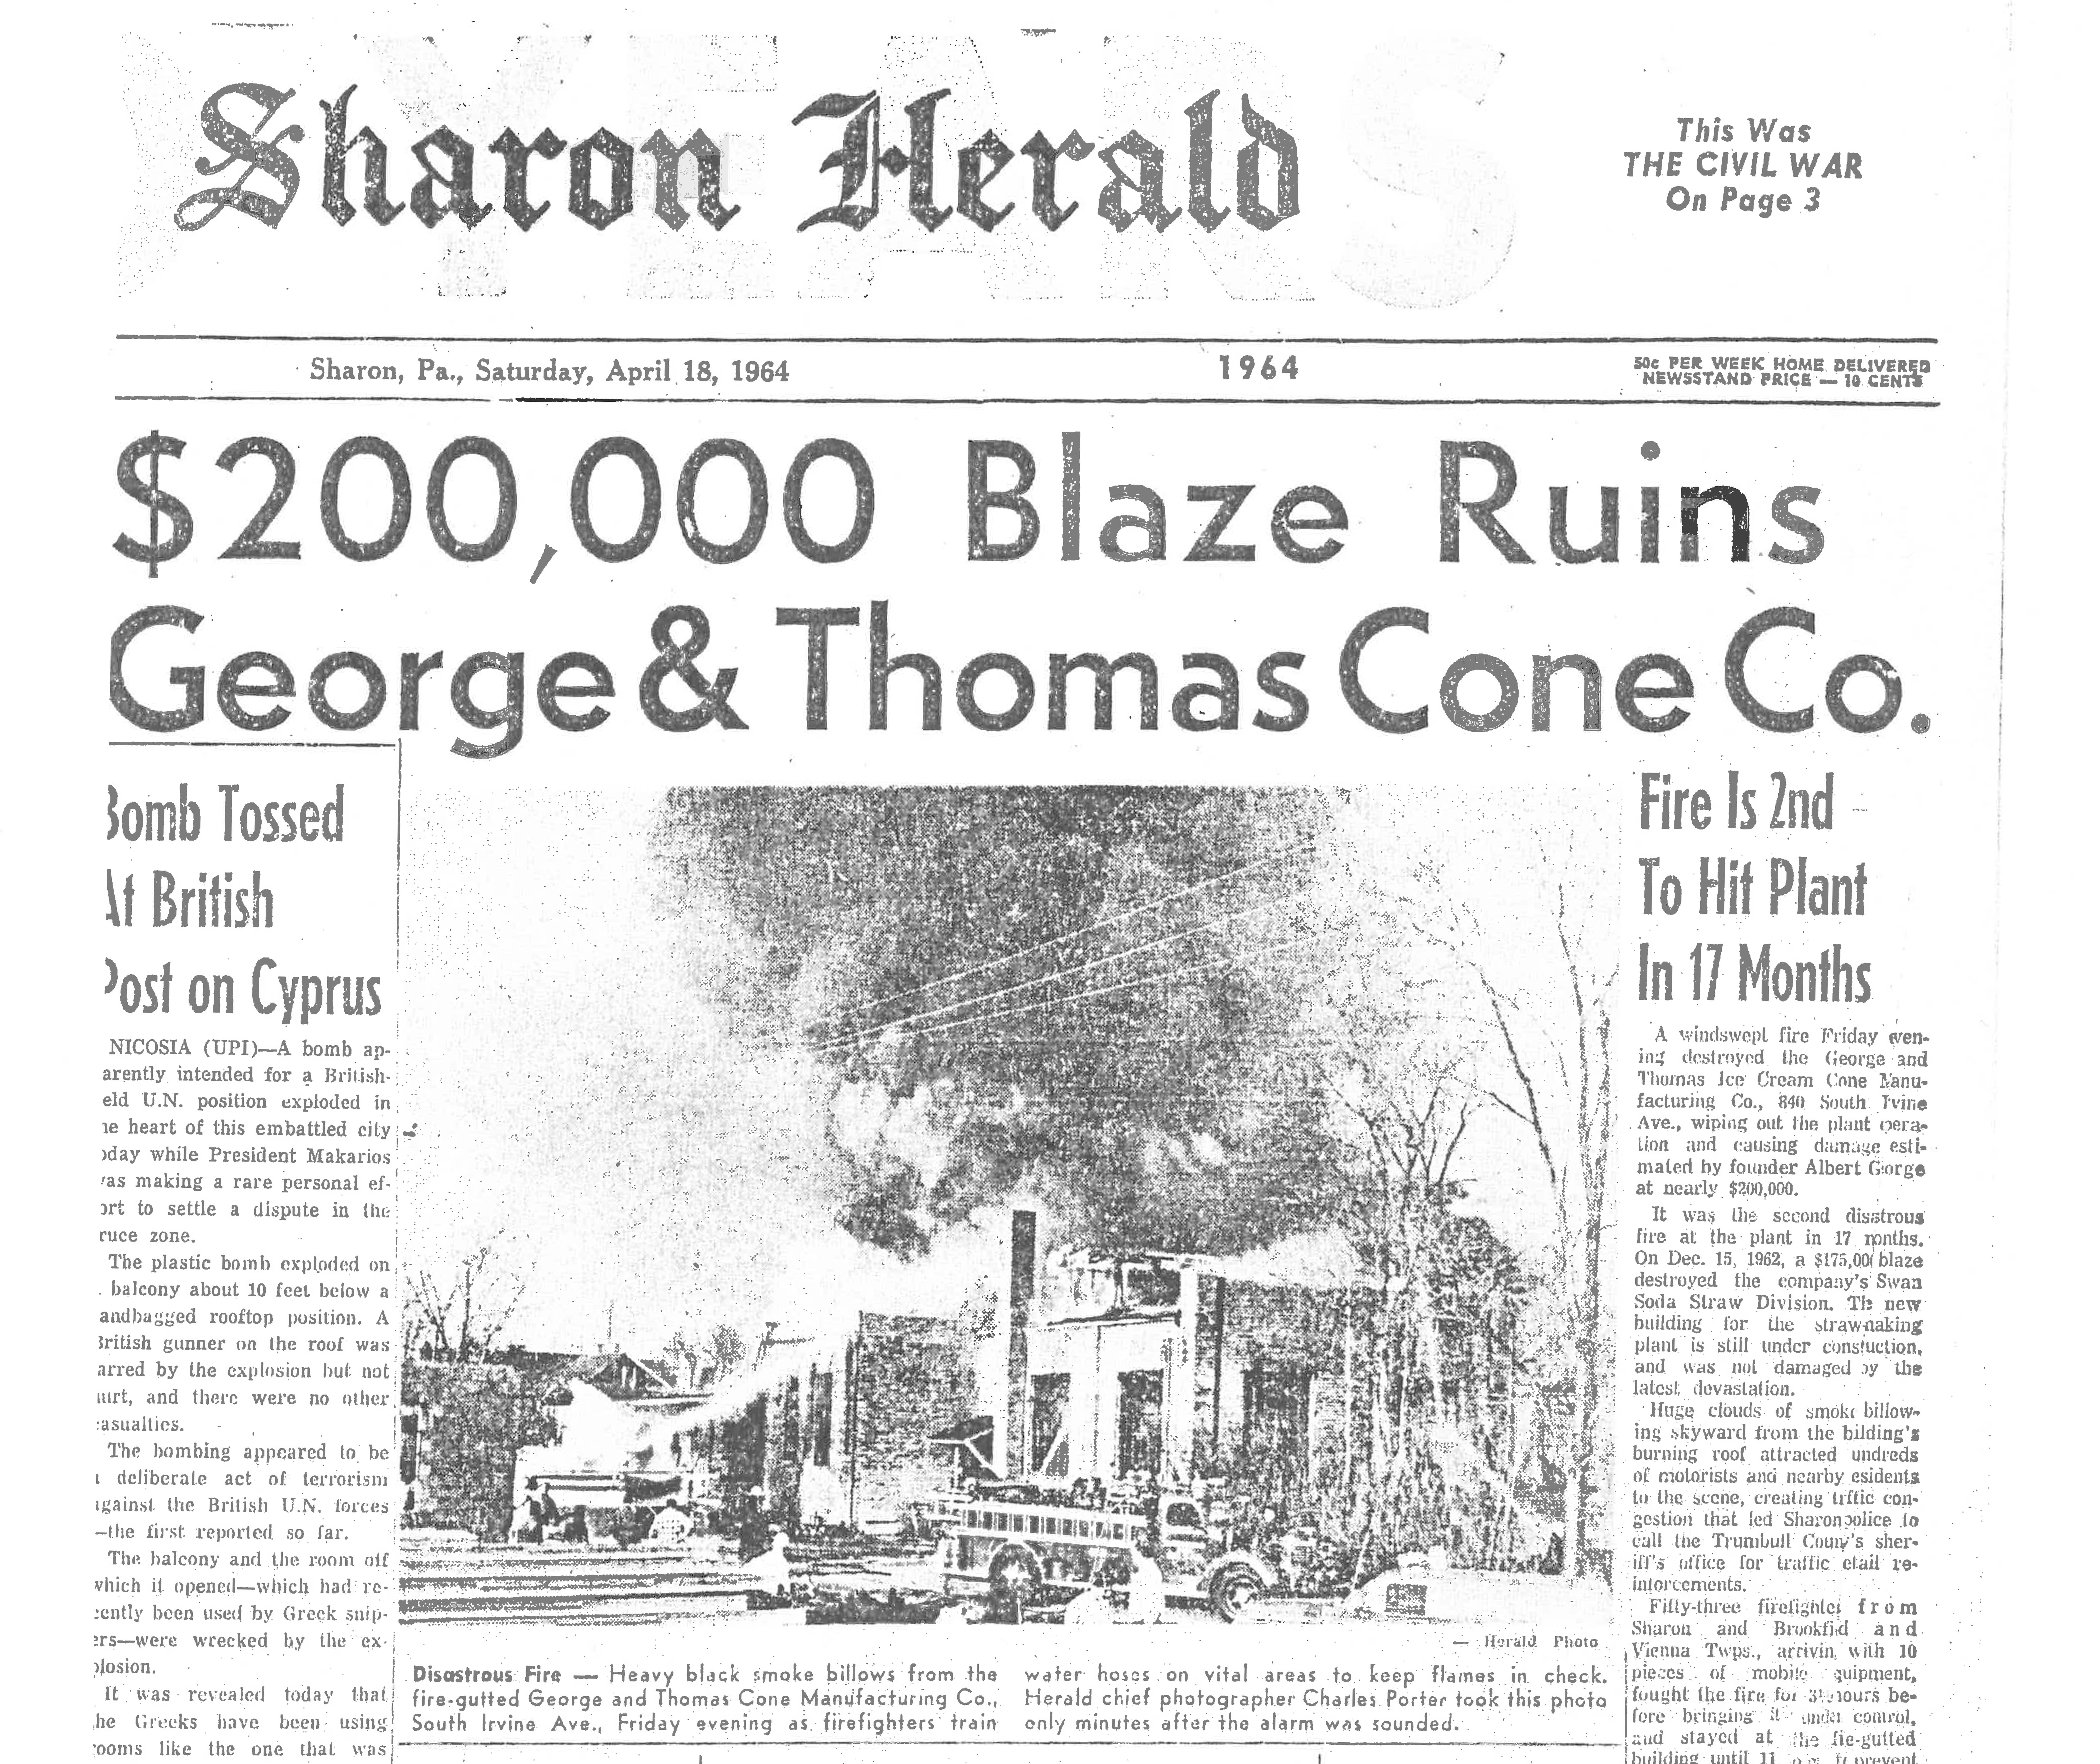 Article taken from the Herald concerning the second fire in 1964 at the at the rear of the second cone company facility located on South Irvine Avenue in Sharon, PA.